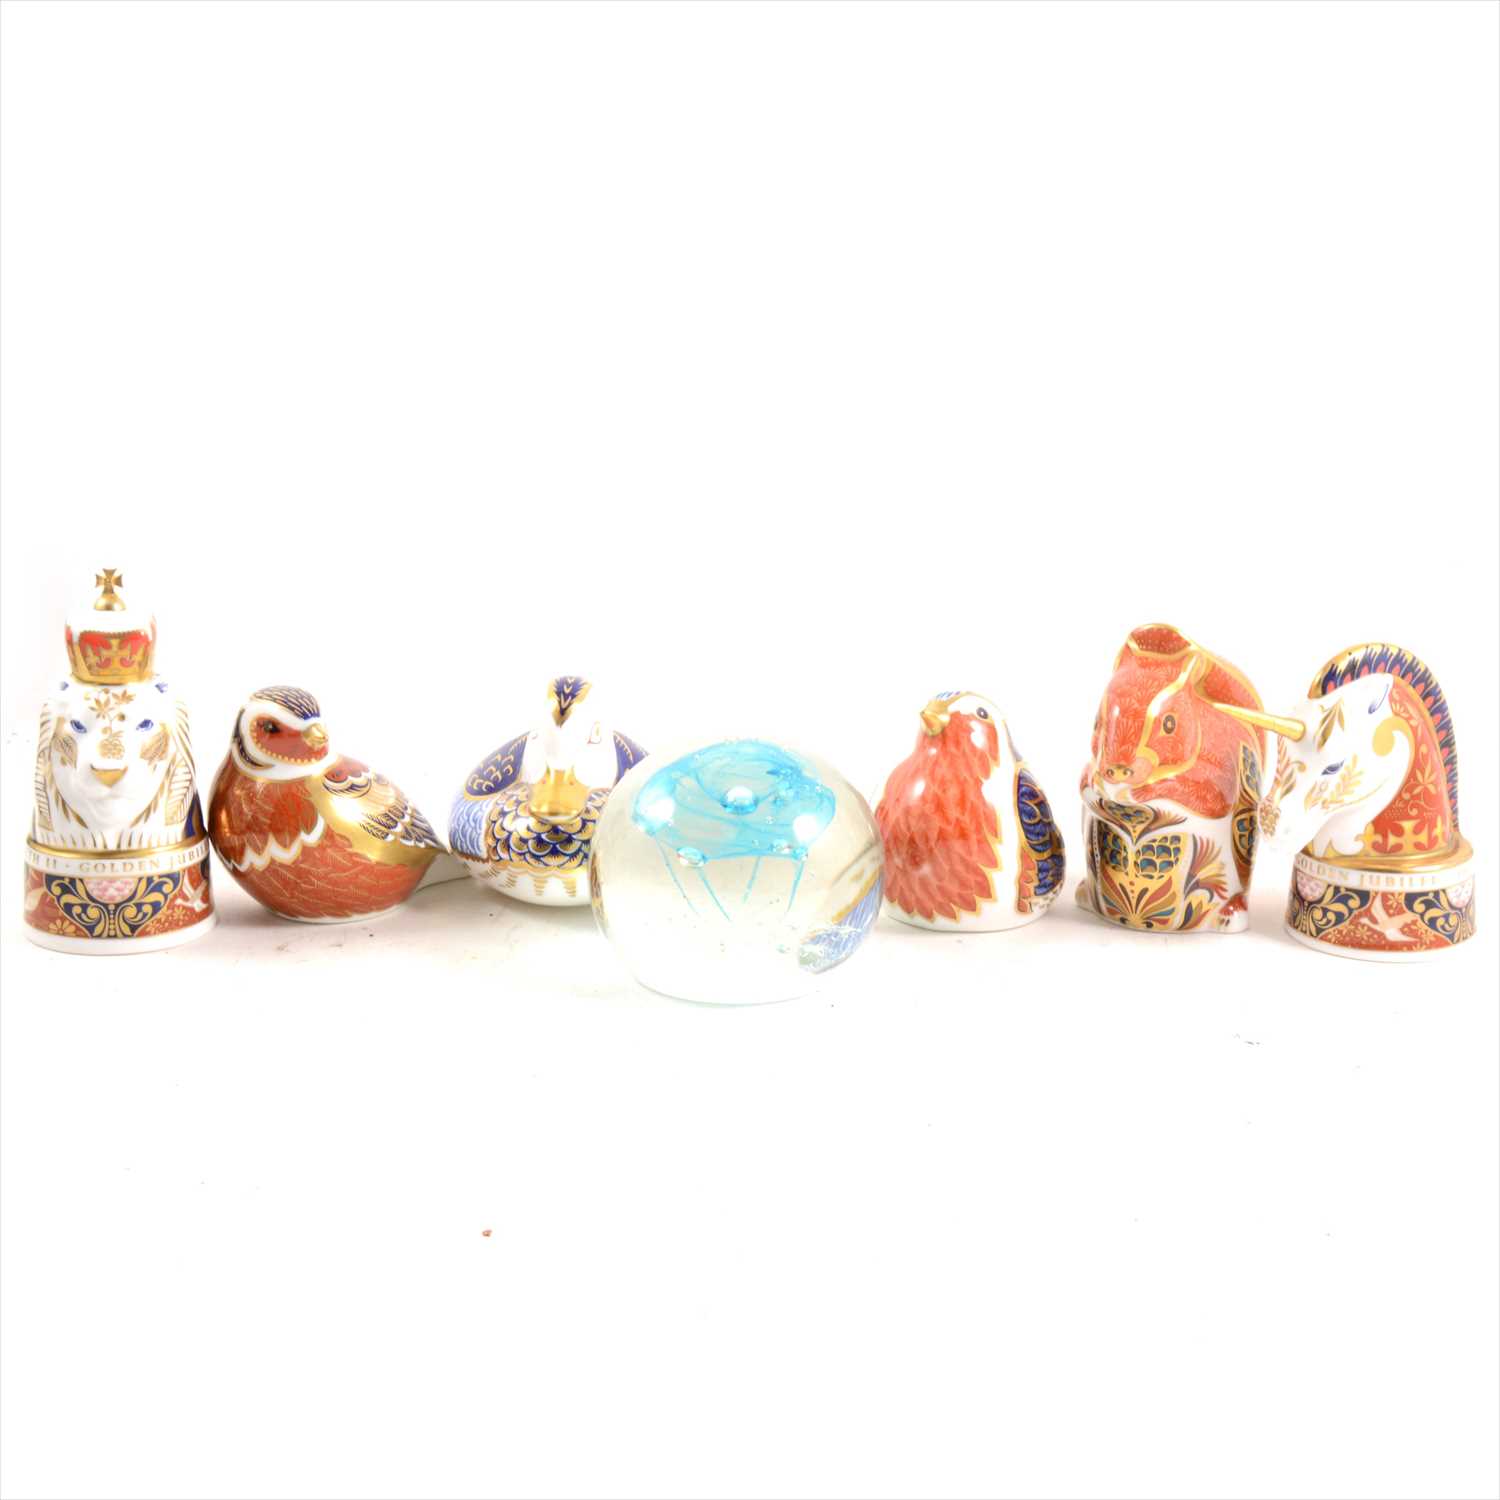 Lot 30 - Four Royal Crown Derby paperweights, pair of Worcester Lion and Unicorn candle snuffers, and a Caithness paperweight.